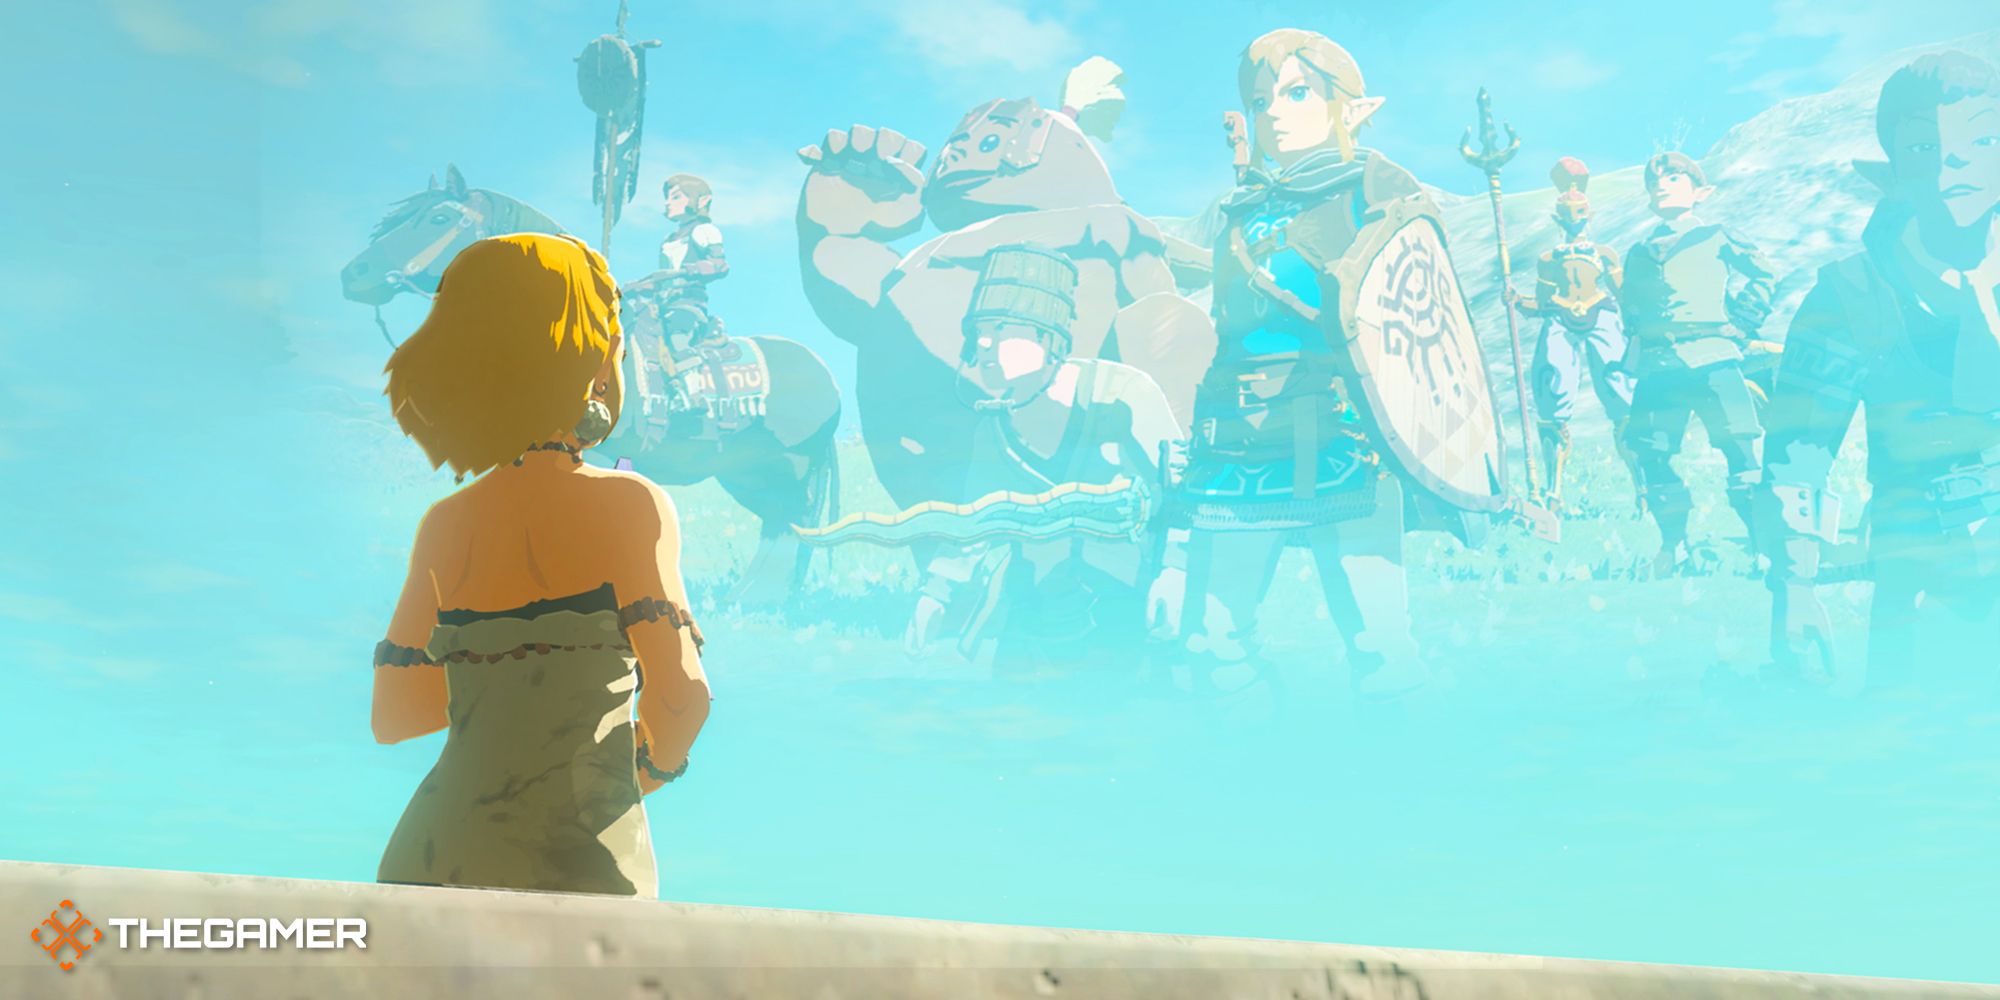 Zelda looking up at Link and the other denizens of Hyrule in Tears of the Kingdom